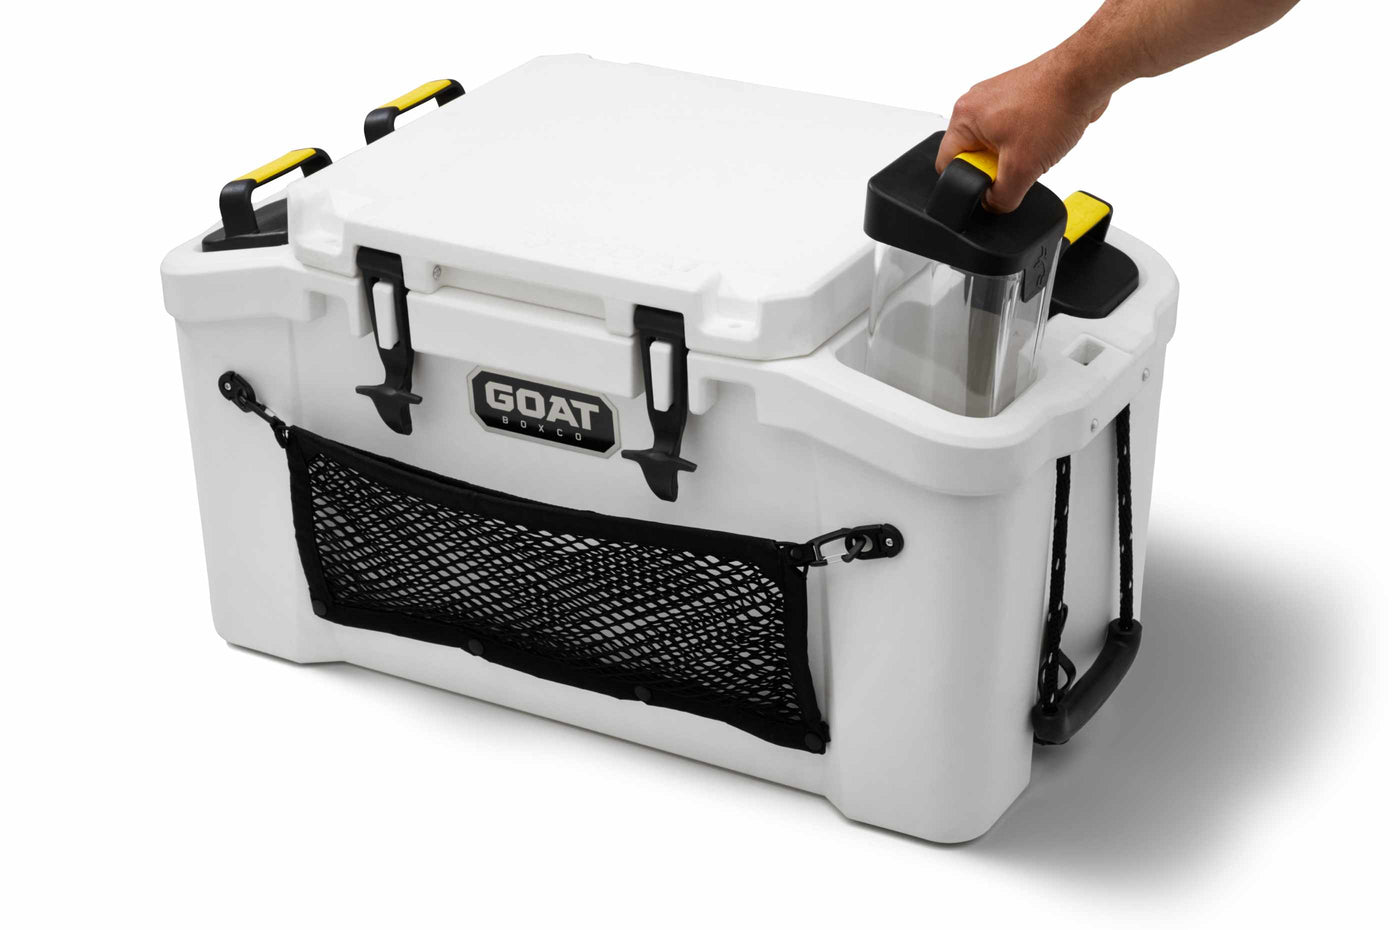 GOAT HUB 50: Best Portable Ice & Food Coolers with Storage